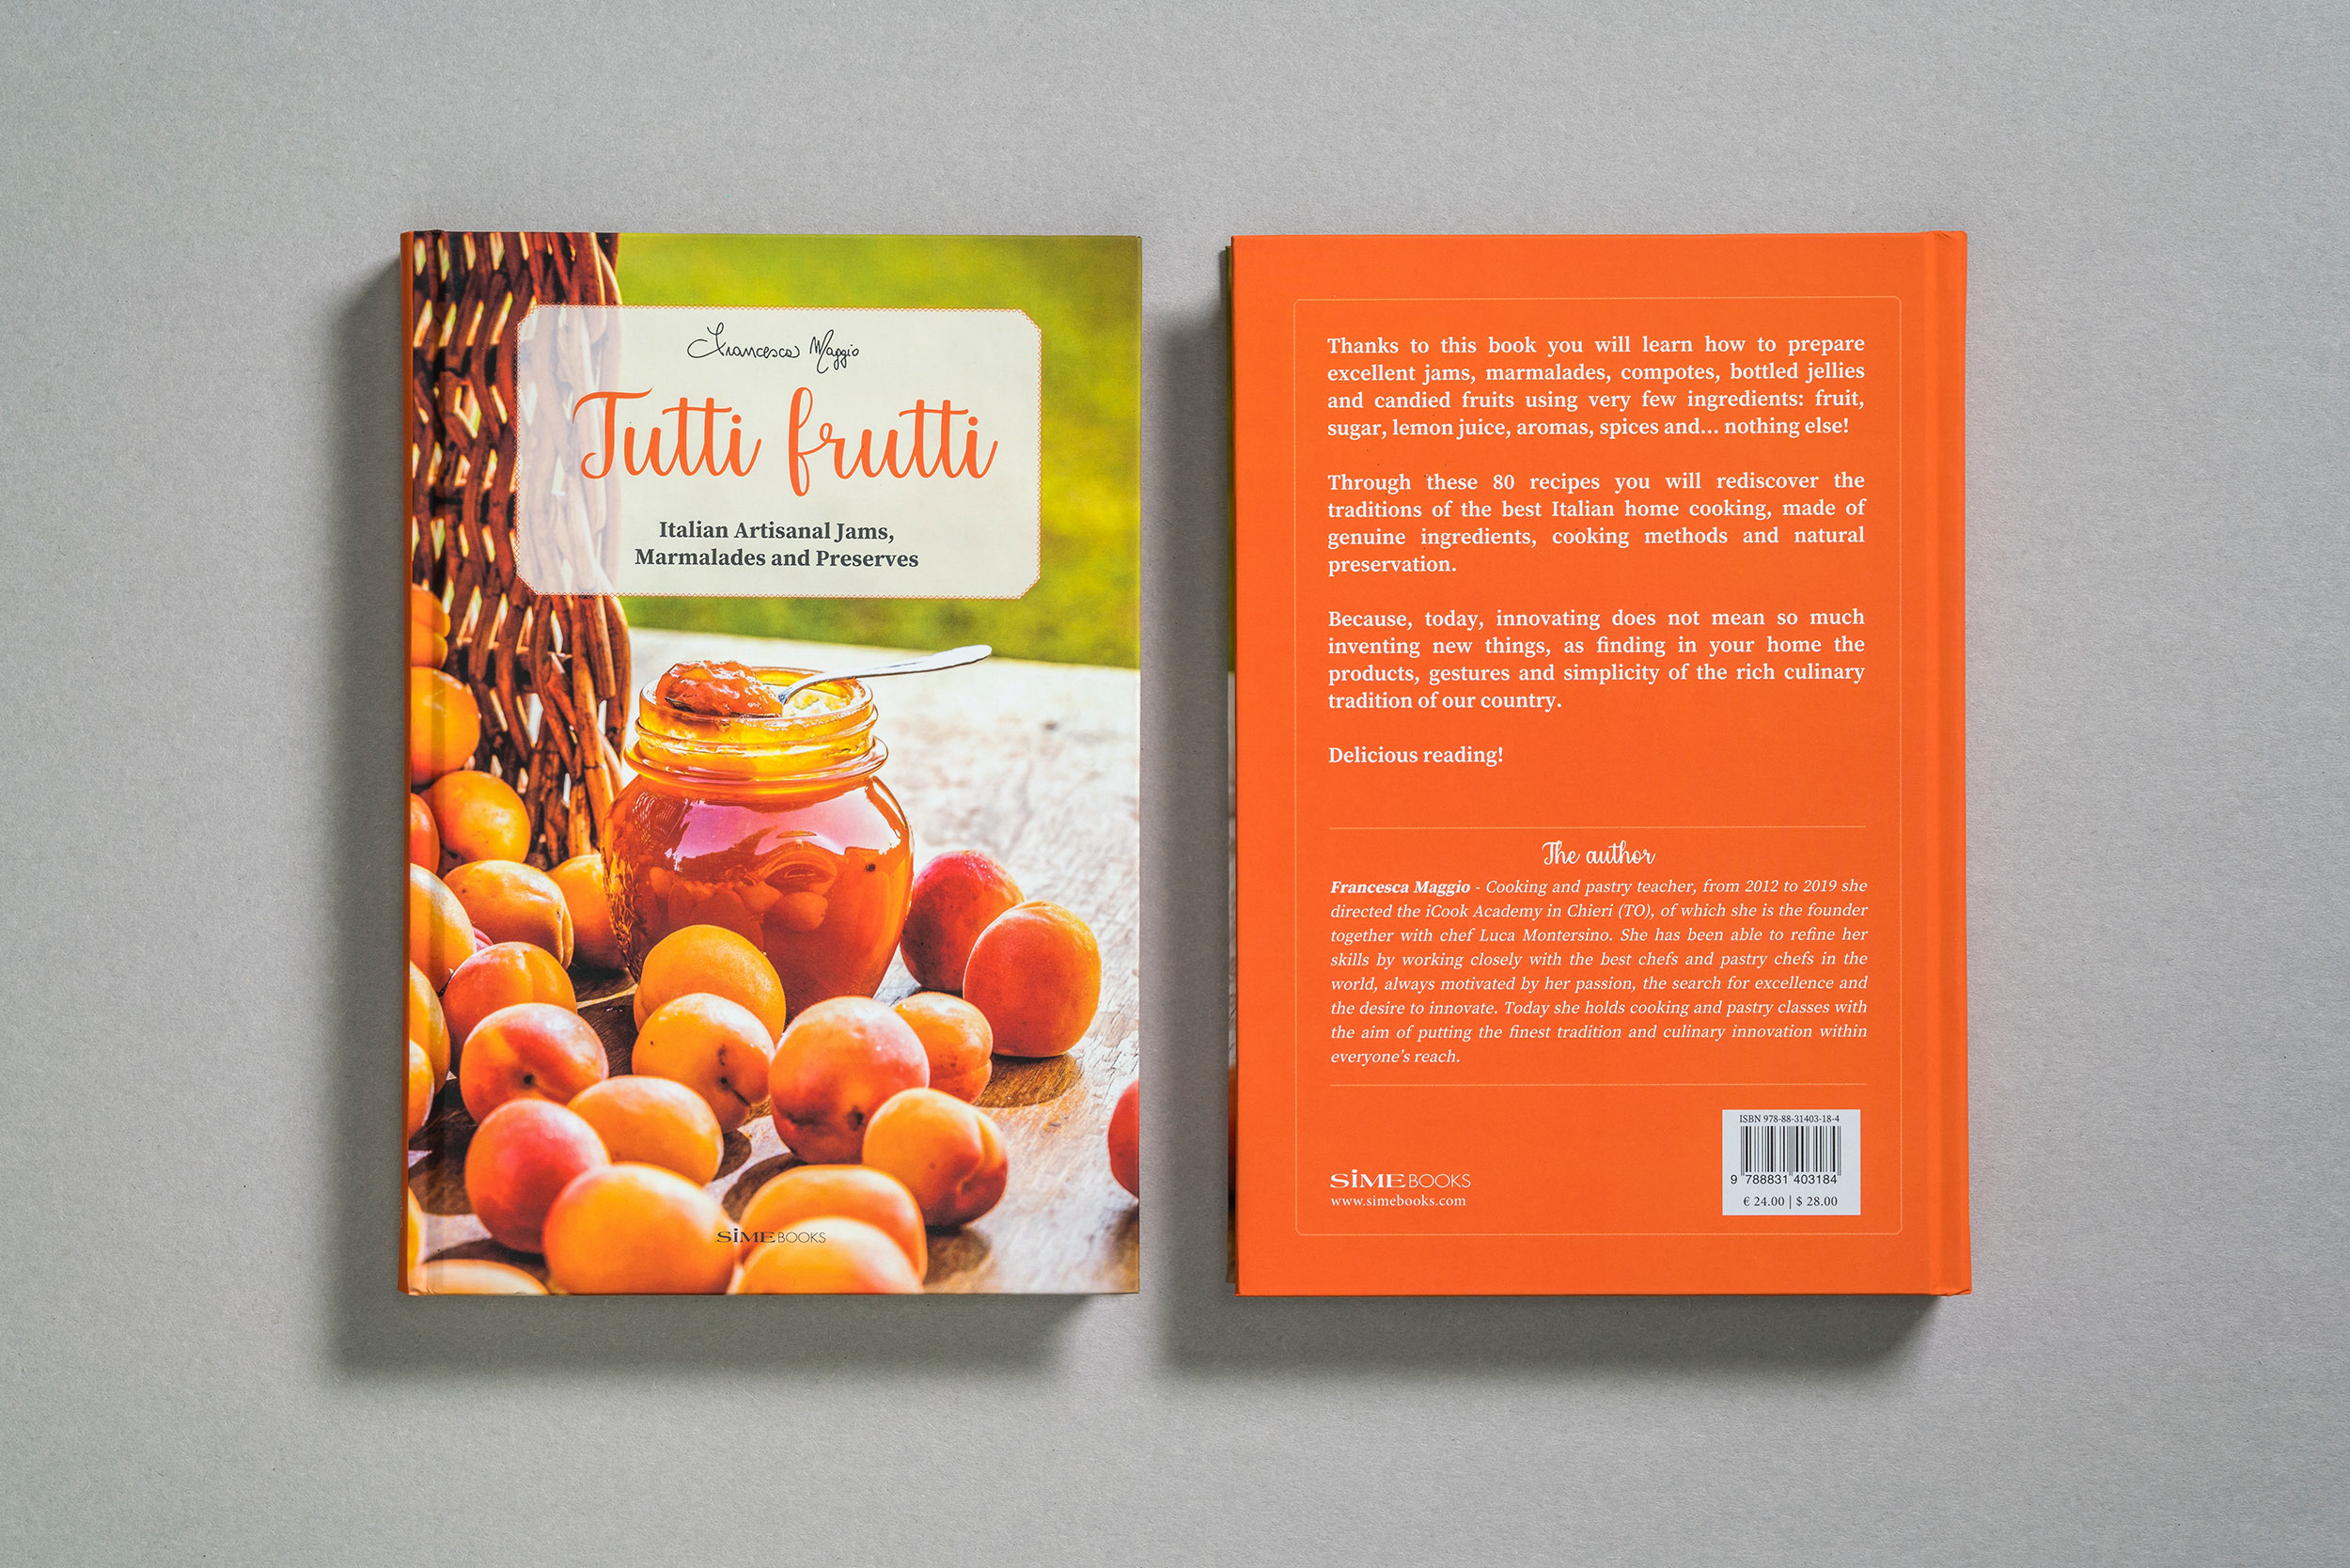 New Images > Tutti Frutti A very sweet journey through Italy with Marco Arduino's photos